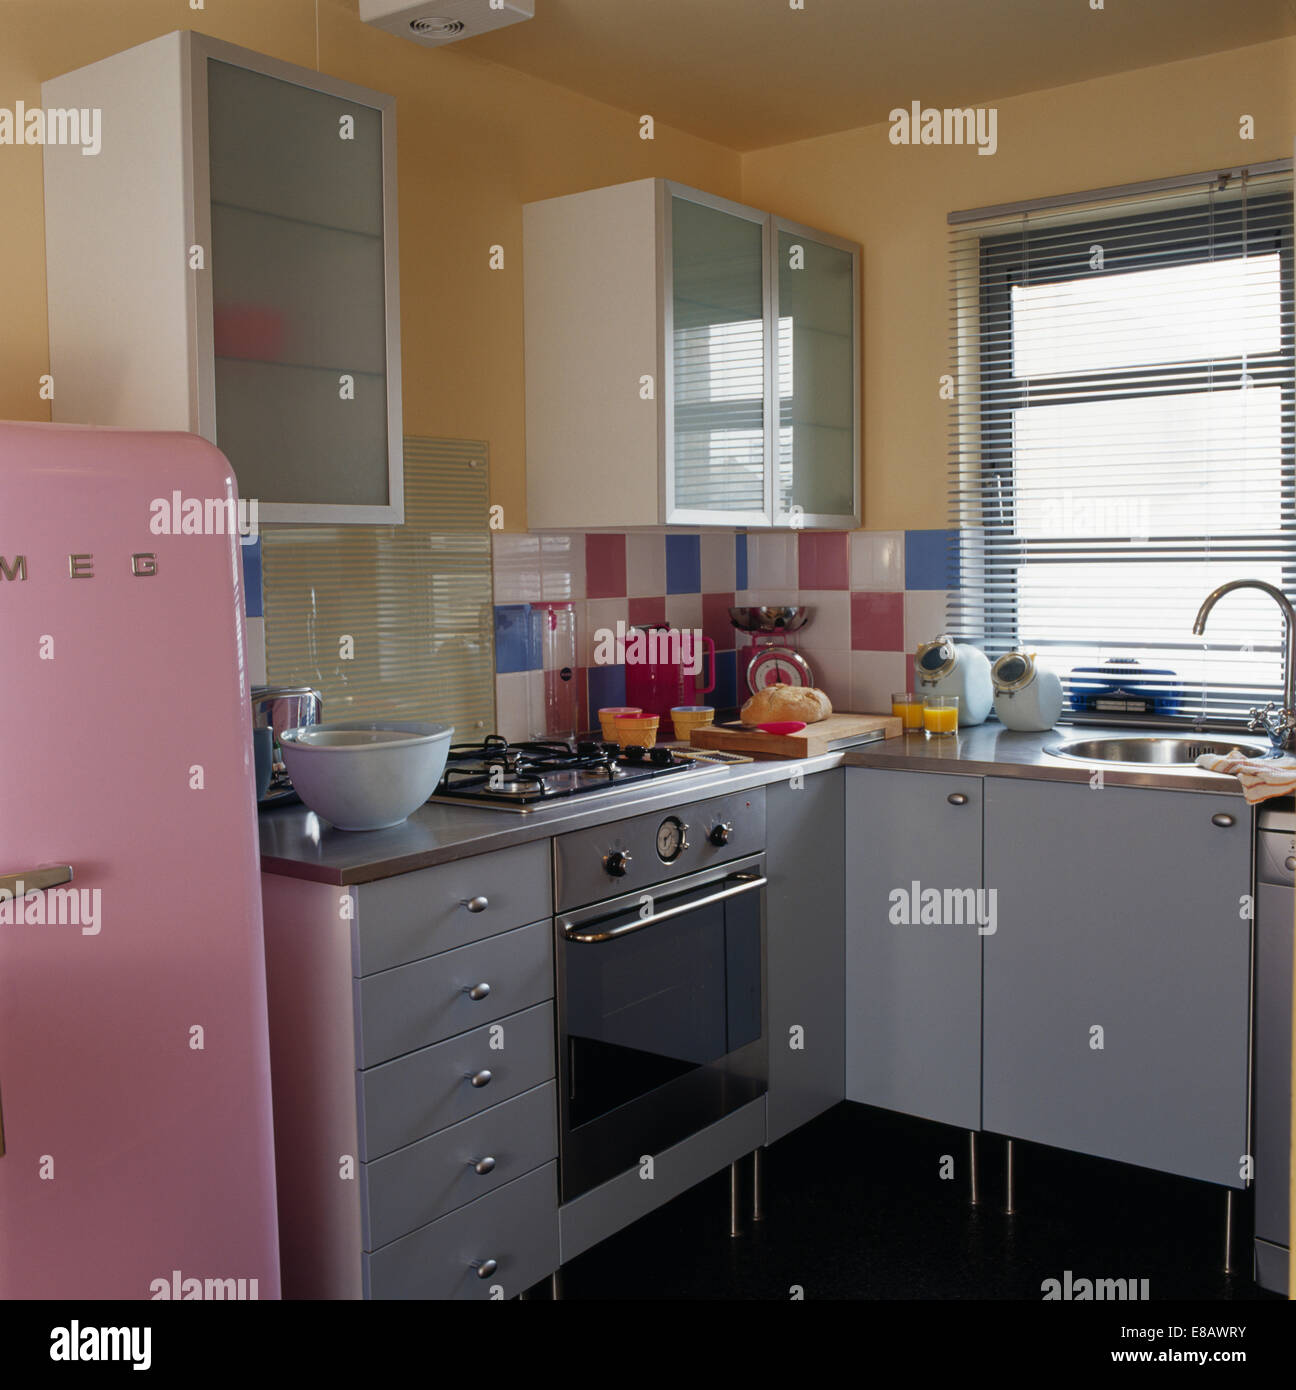 Stainless-steel oven in small retro-style kitchen with Venetian blind on window above sink Stock Photo